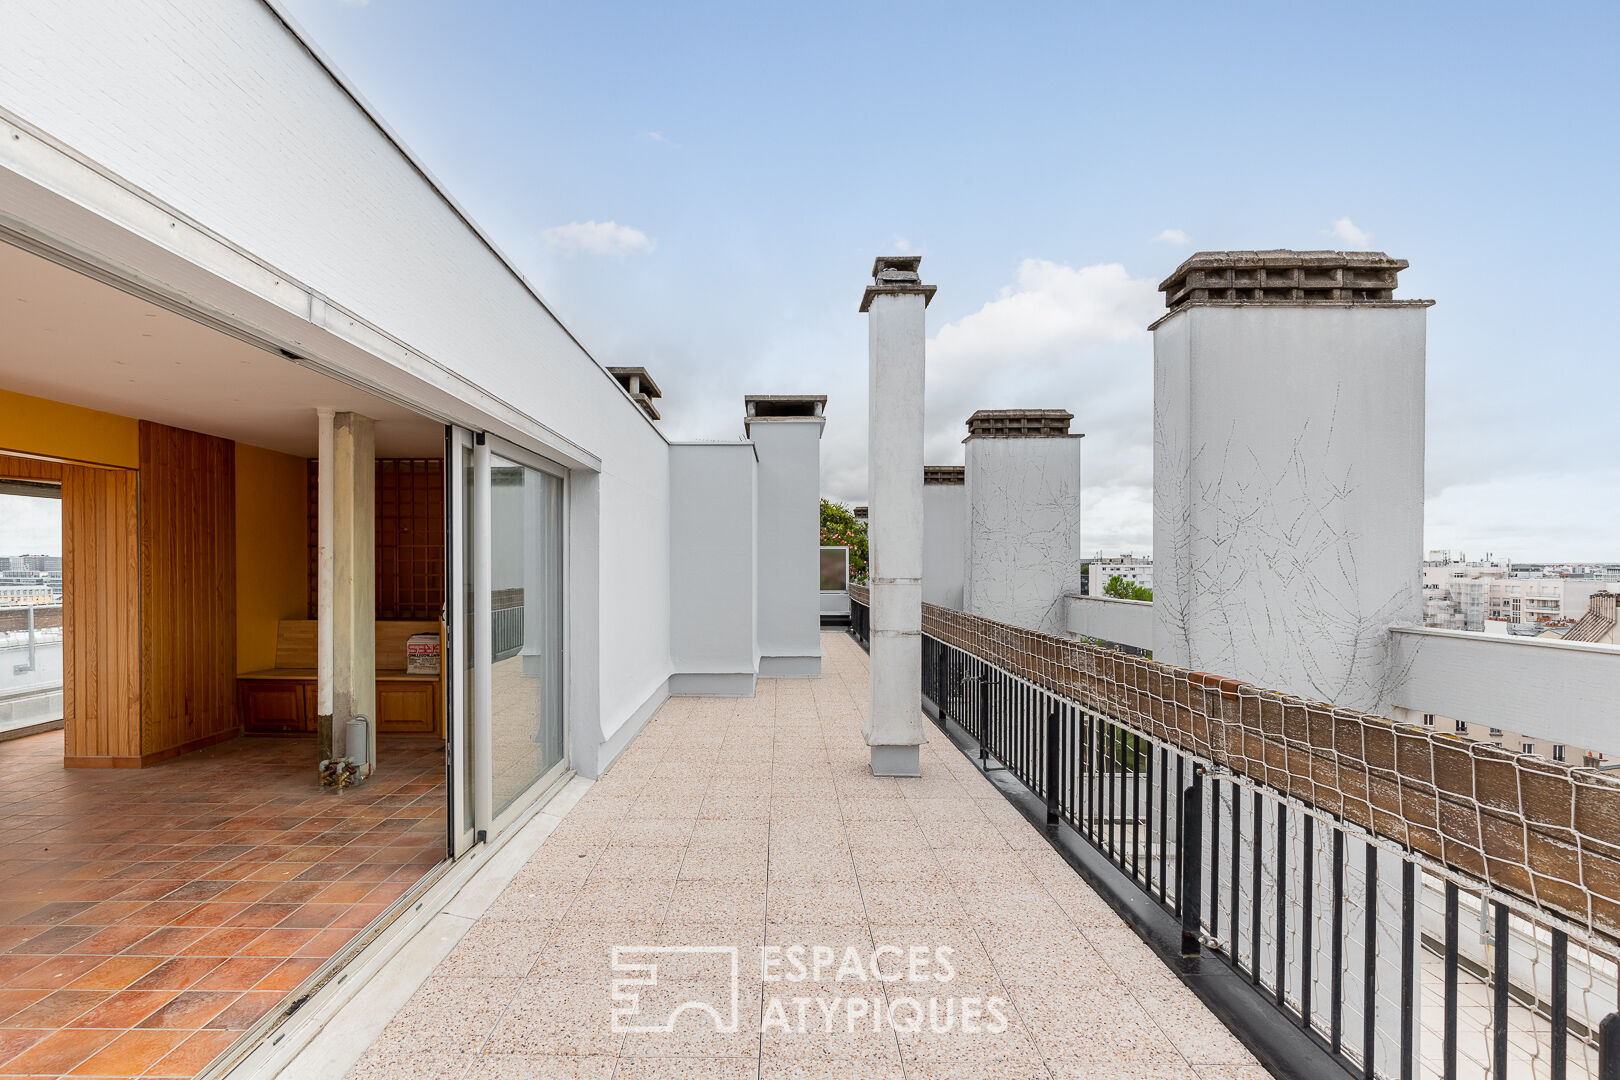 Duplex with terraces and garden on the top floor to renovate